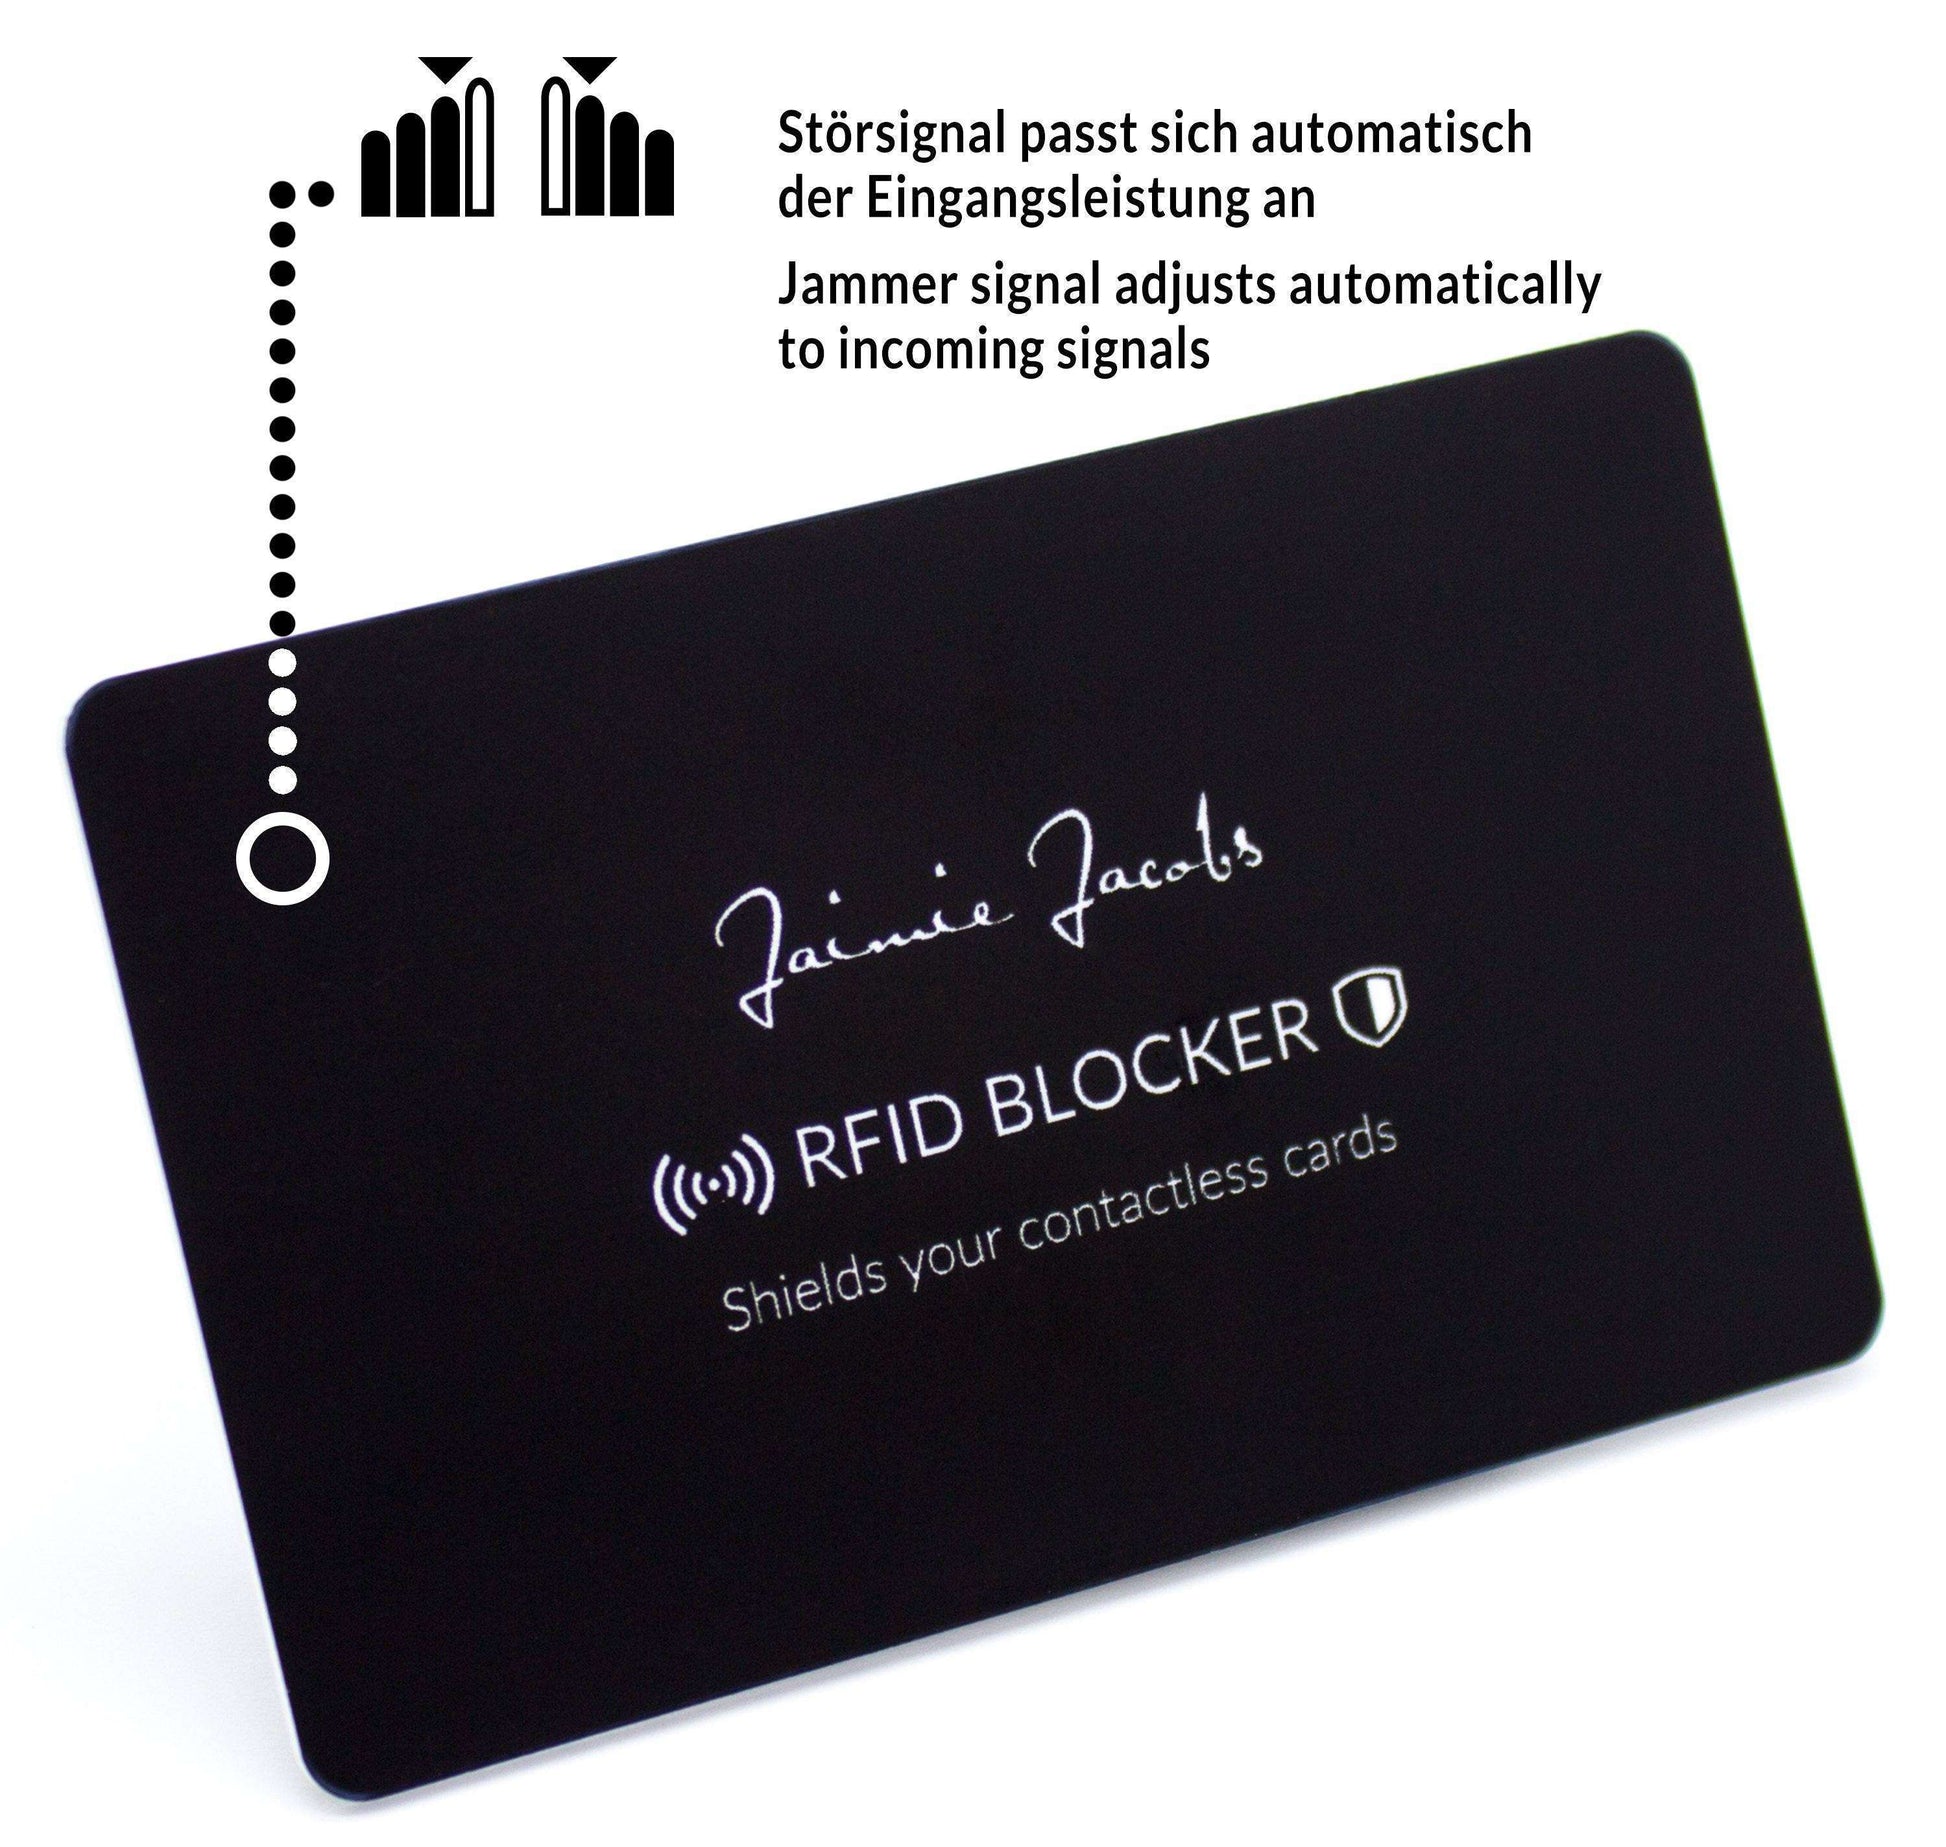 RFID protection card for RFID and NFC cards